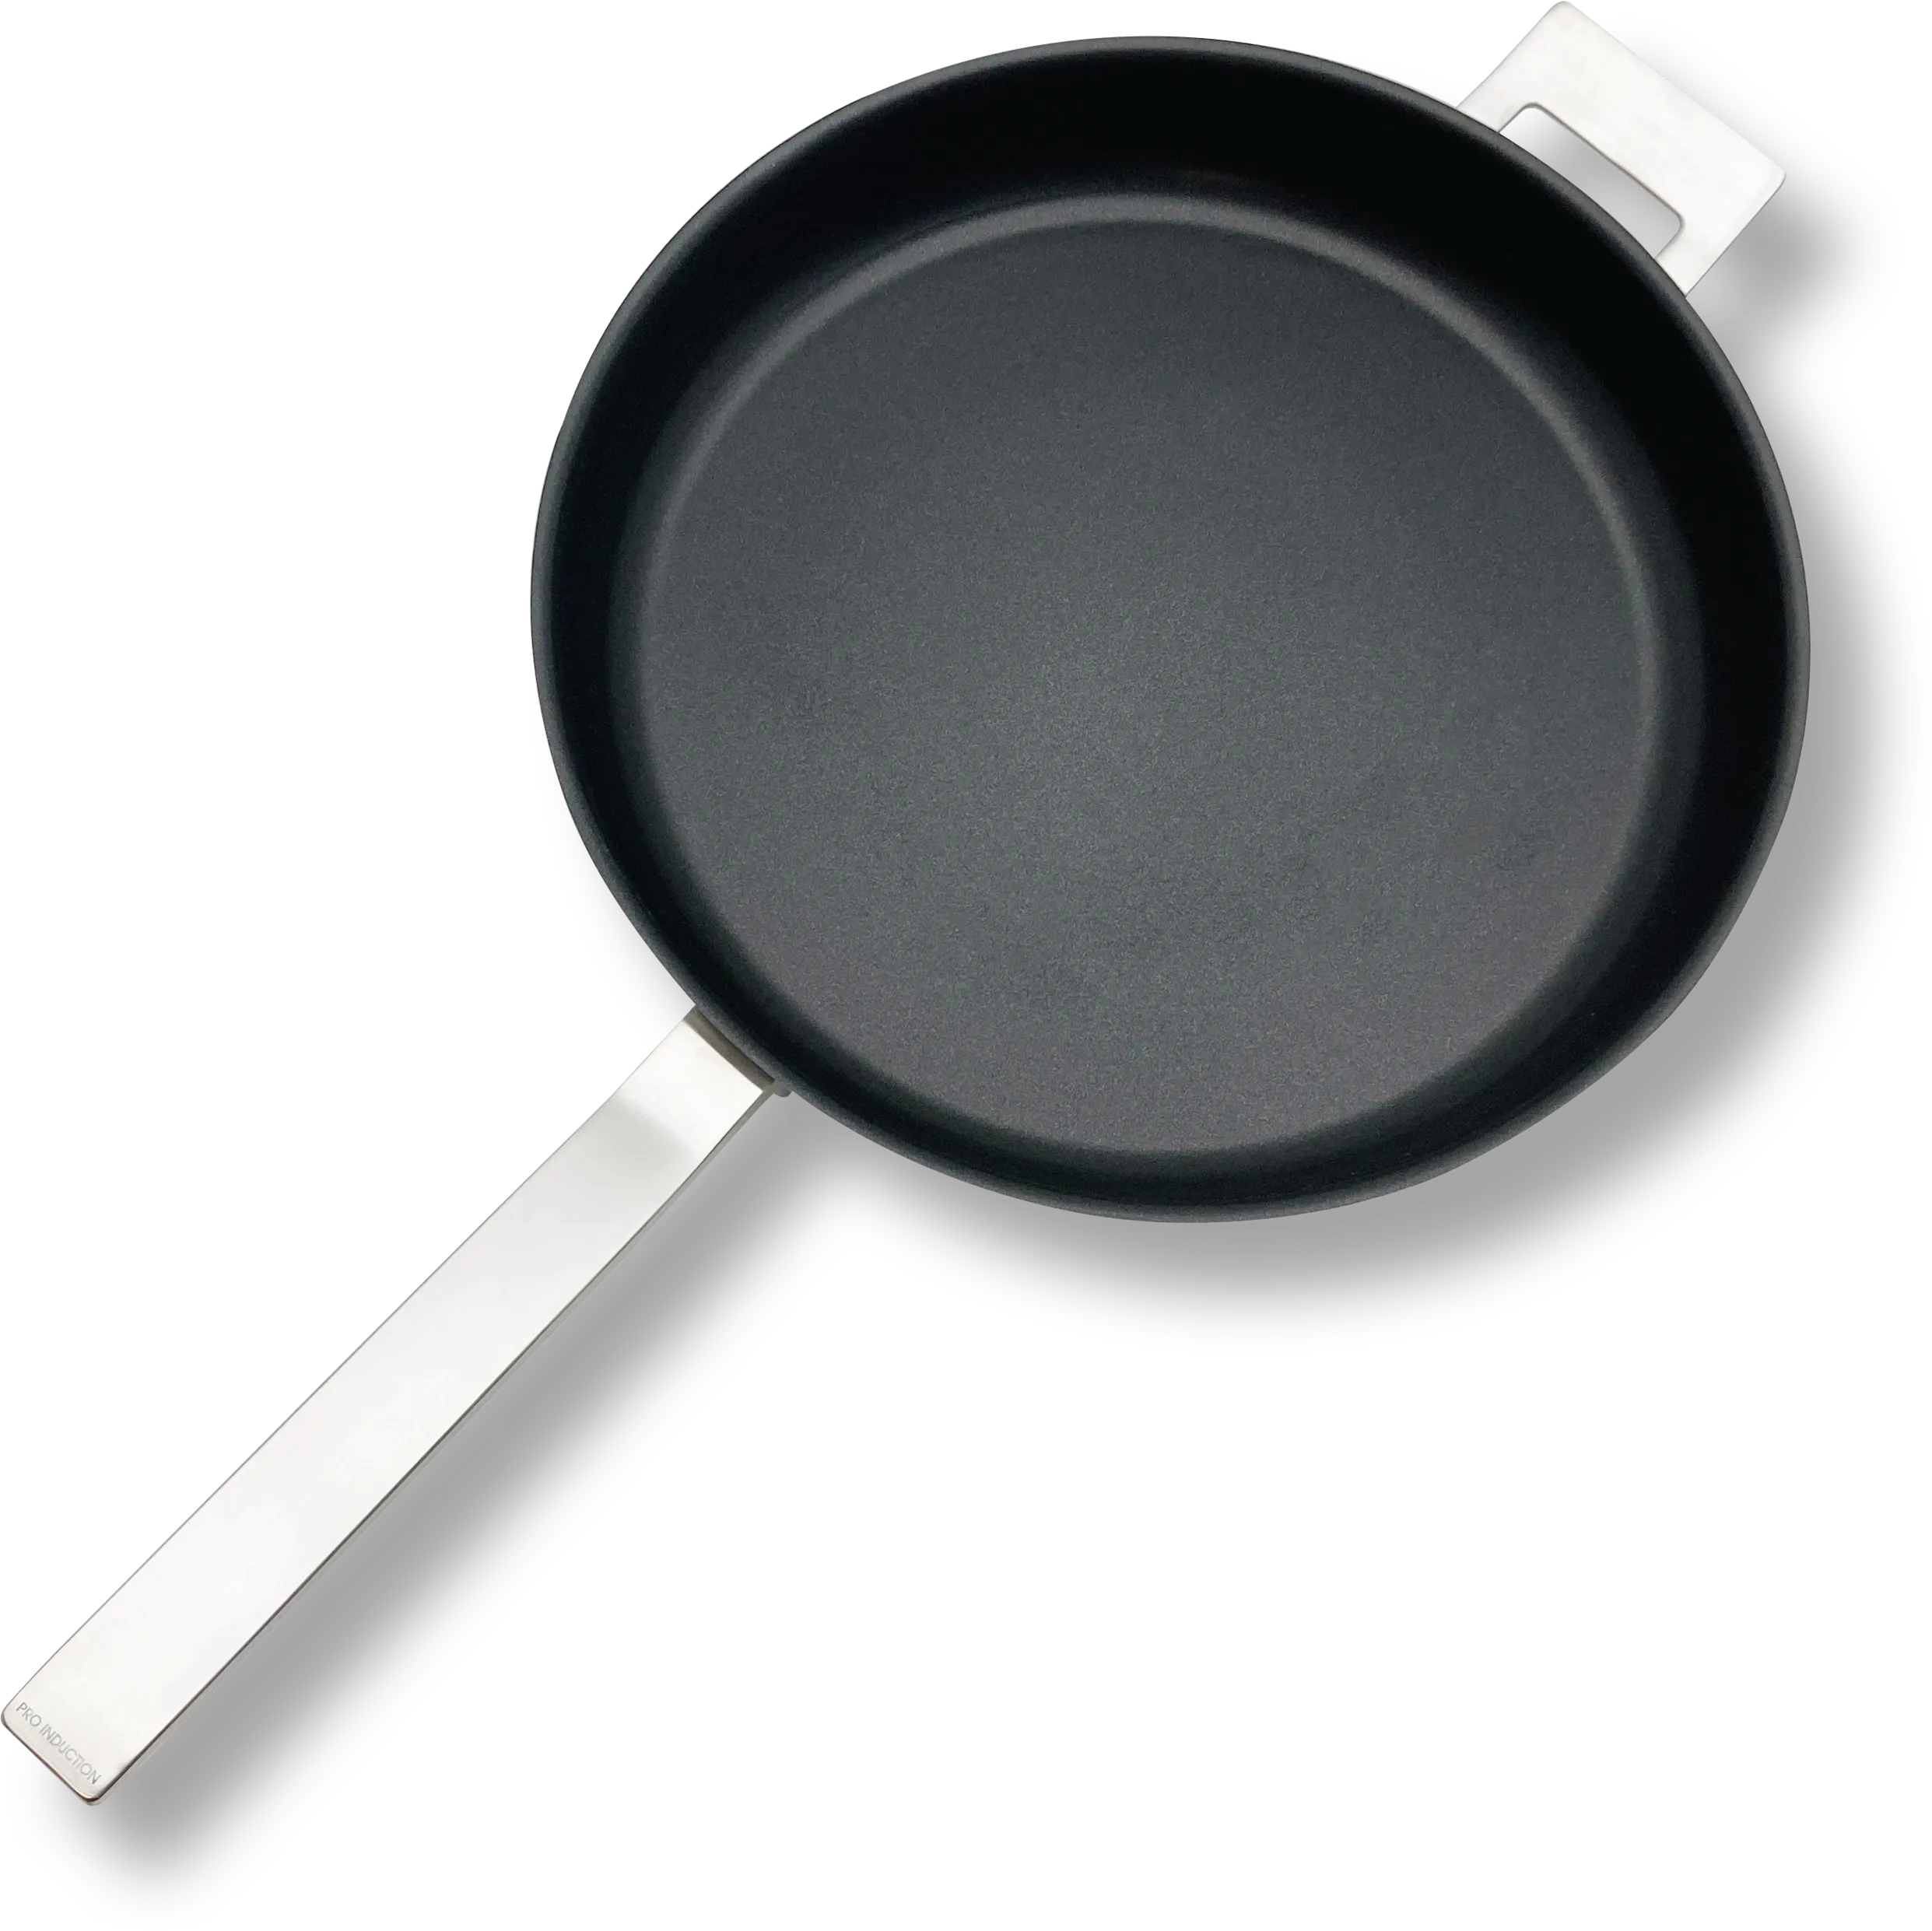  Pro Induction Coated pan 32 cm, 2 handles 